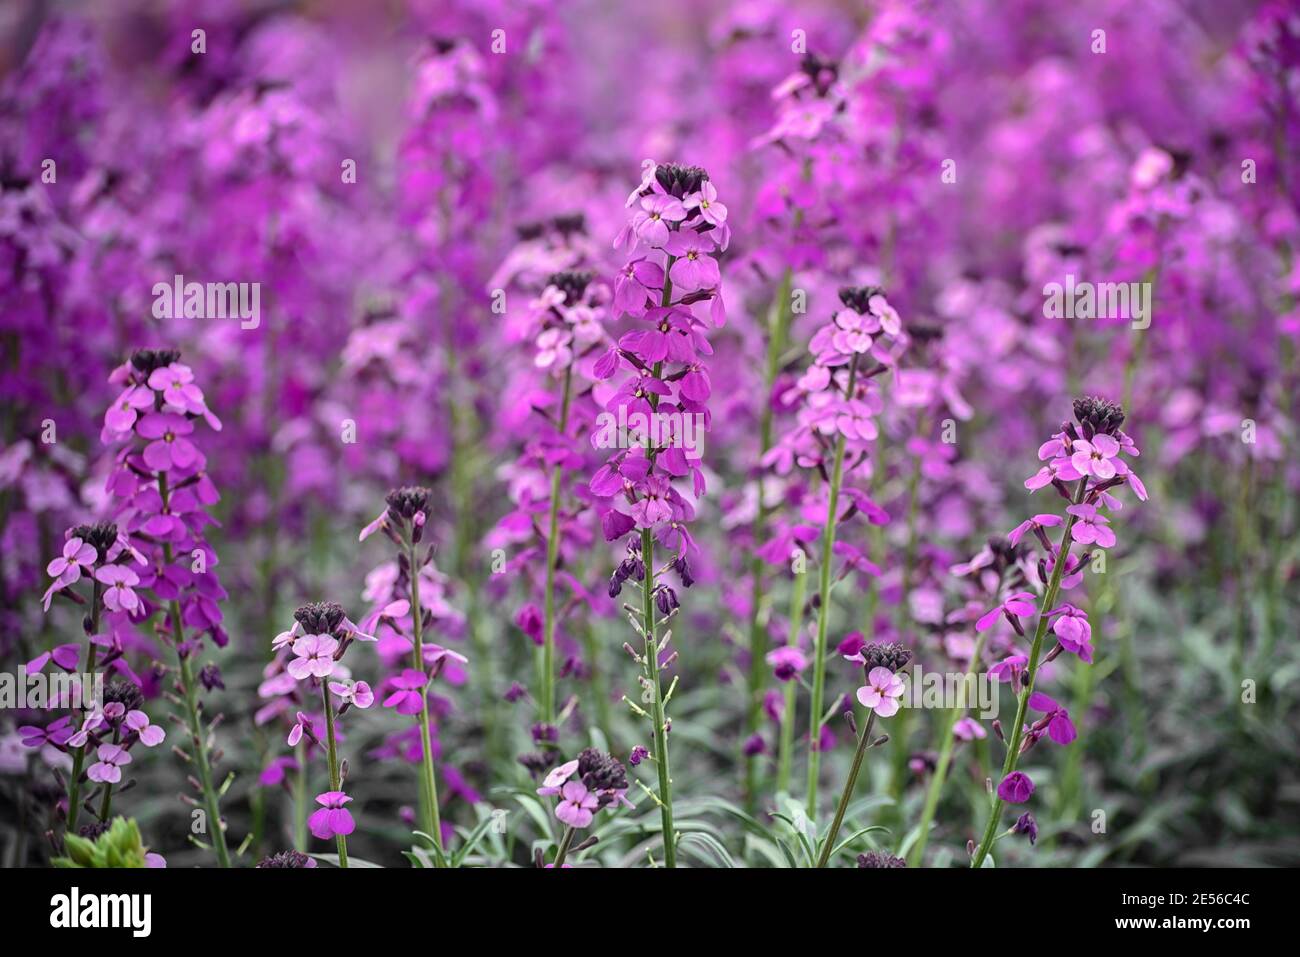 Erysimum, wallflower, a genus of flowering plants in the cabbage family. Concept My garden. Close up Stock Photo